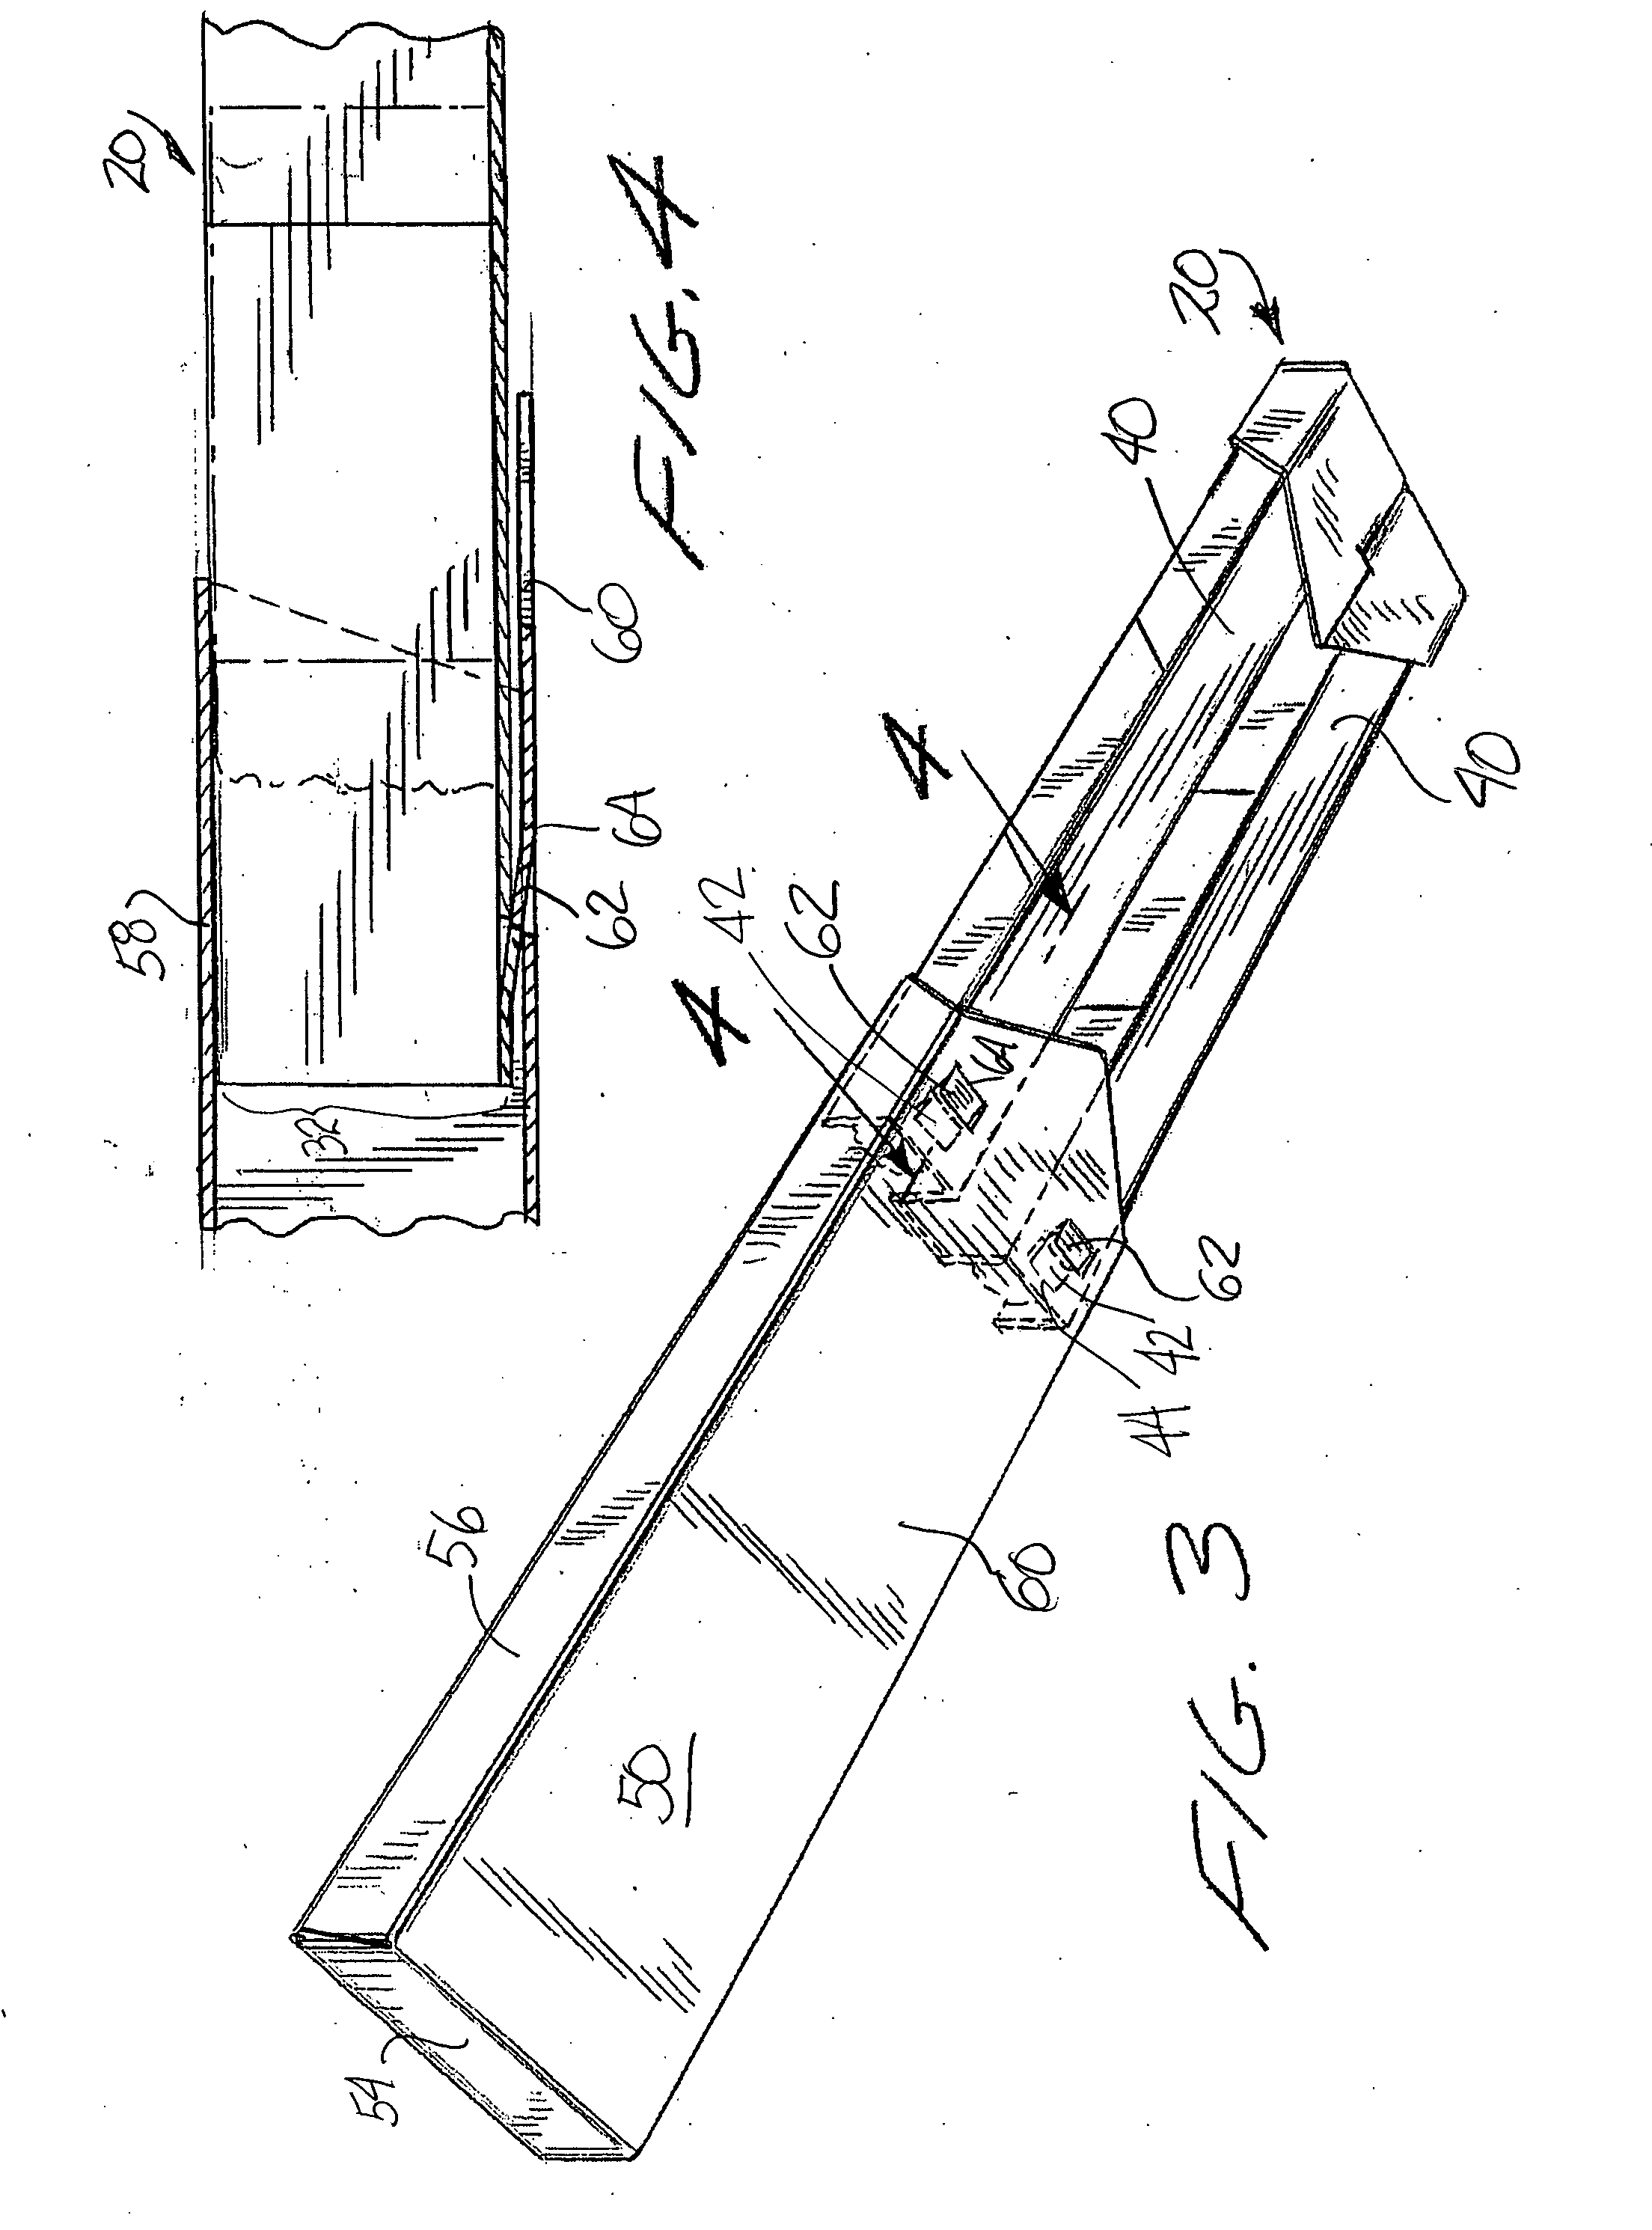 Paperboard container for extinguishing and disposal of lighted cigarettes